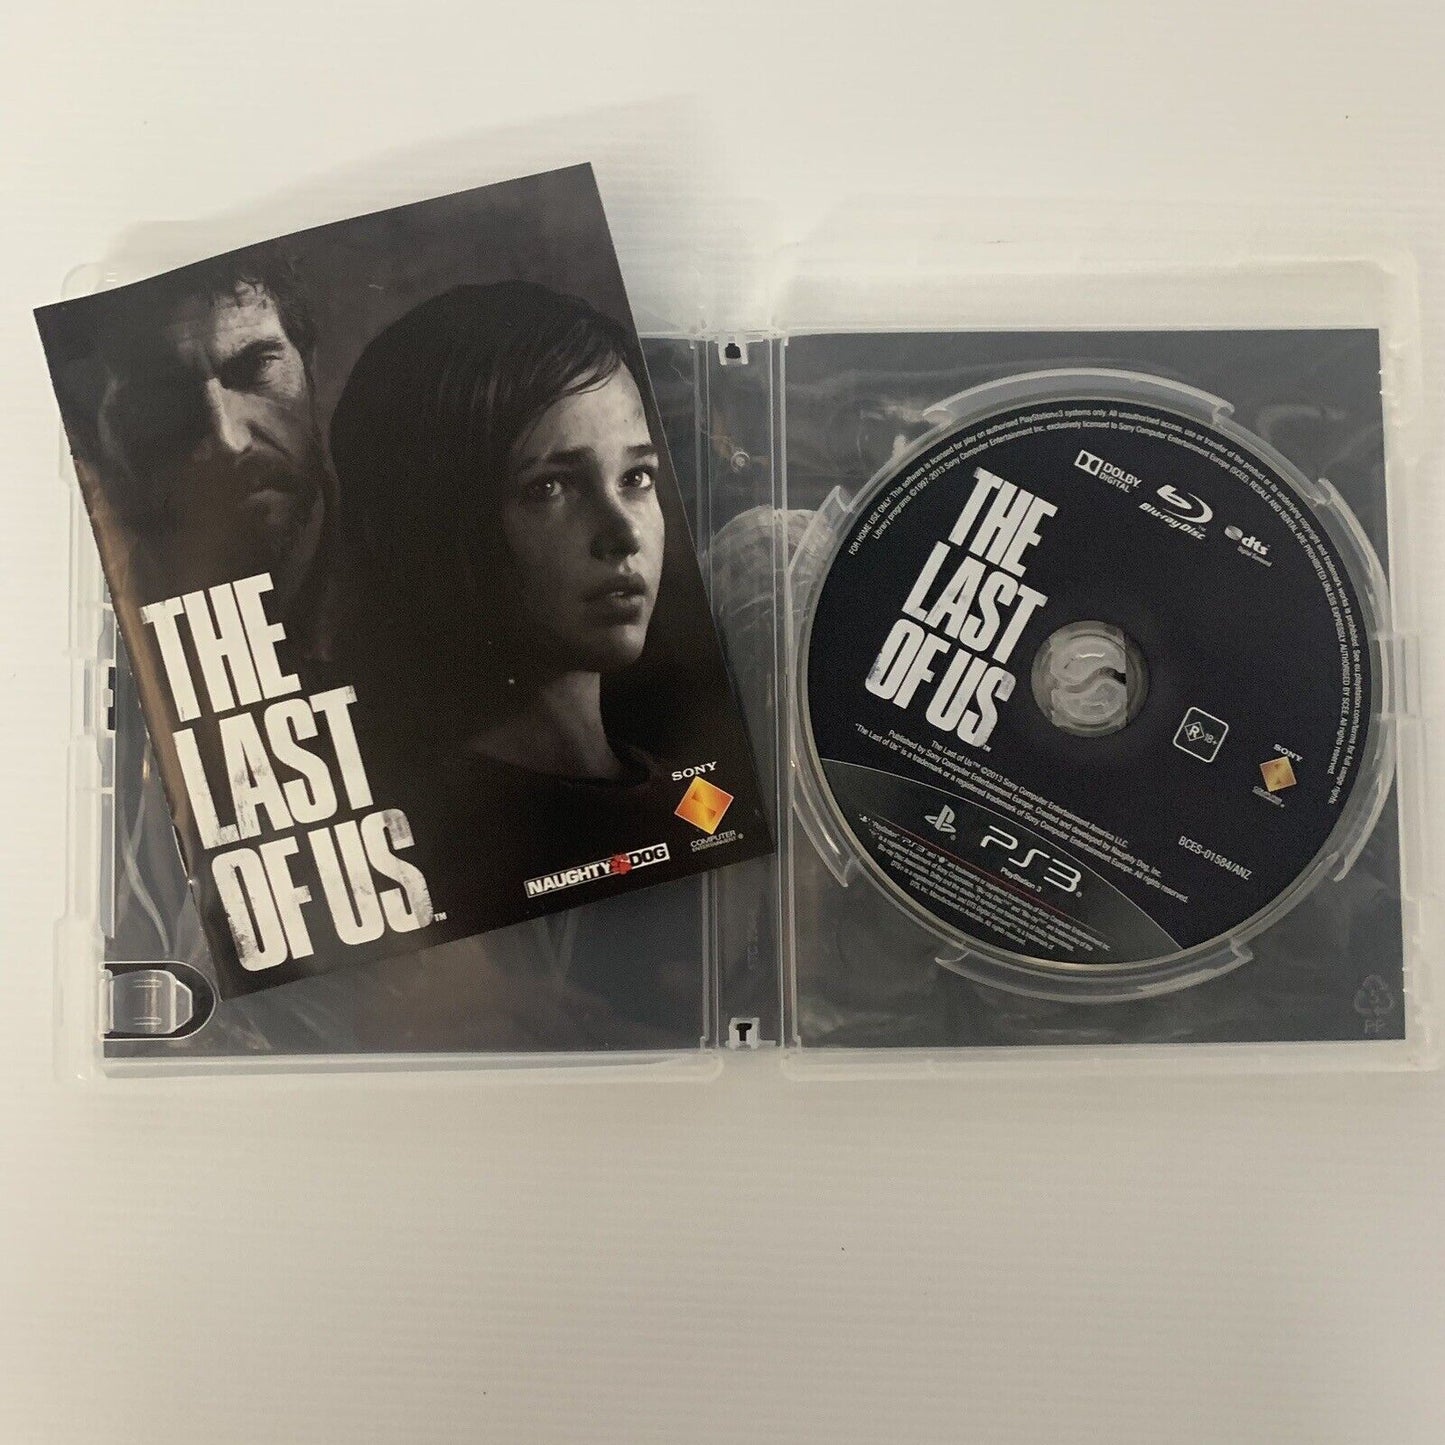 The Last of Us PlayStation 3 PS3 Game